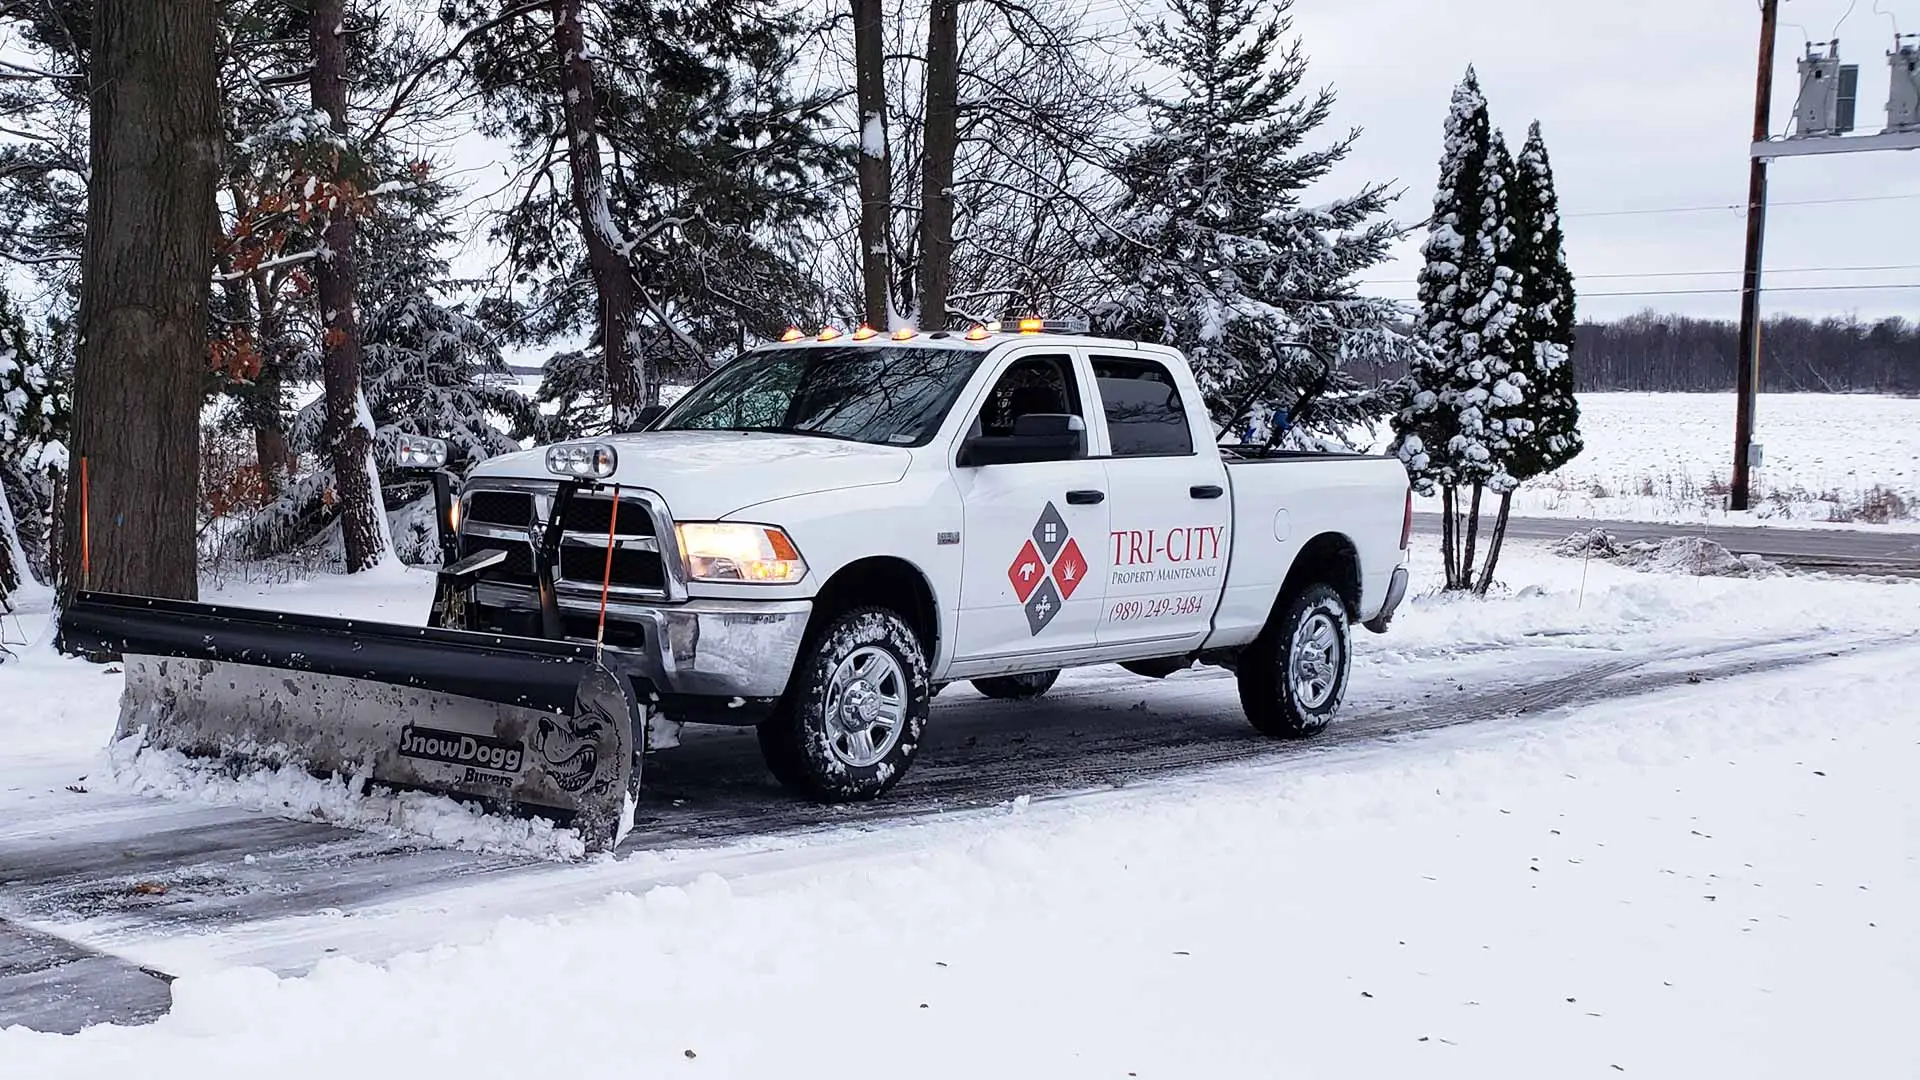 Our snow removal team starts services for commercial clients once the snow has reached 1.5 inches in depth.